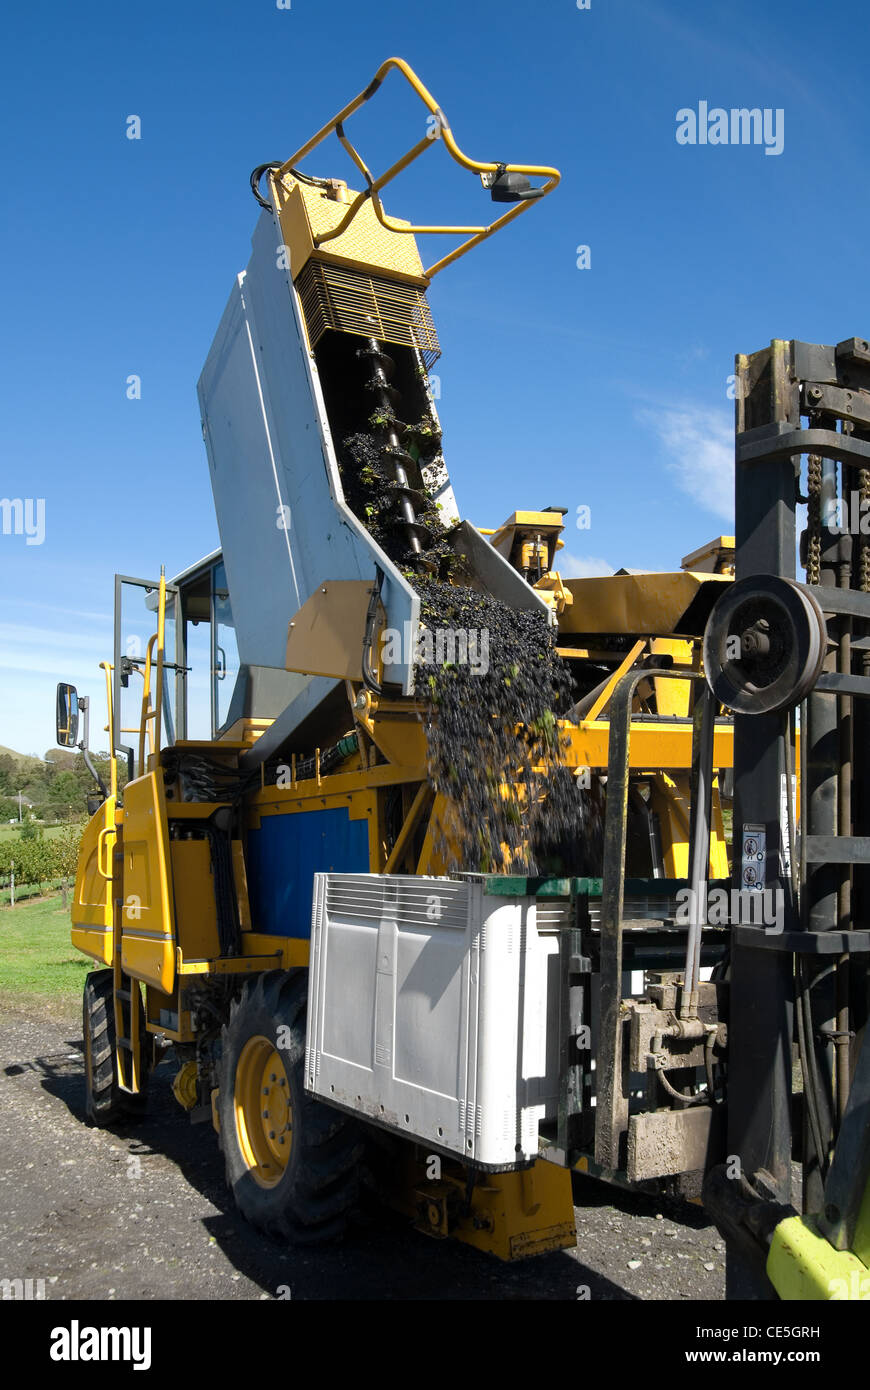 A grape harvester empties its load of freshly -picked grapes into a large container on the front of a fork-lift Stock Photo